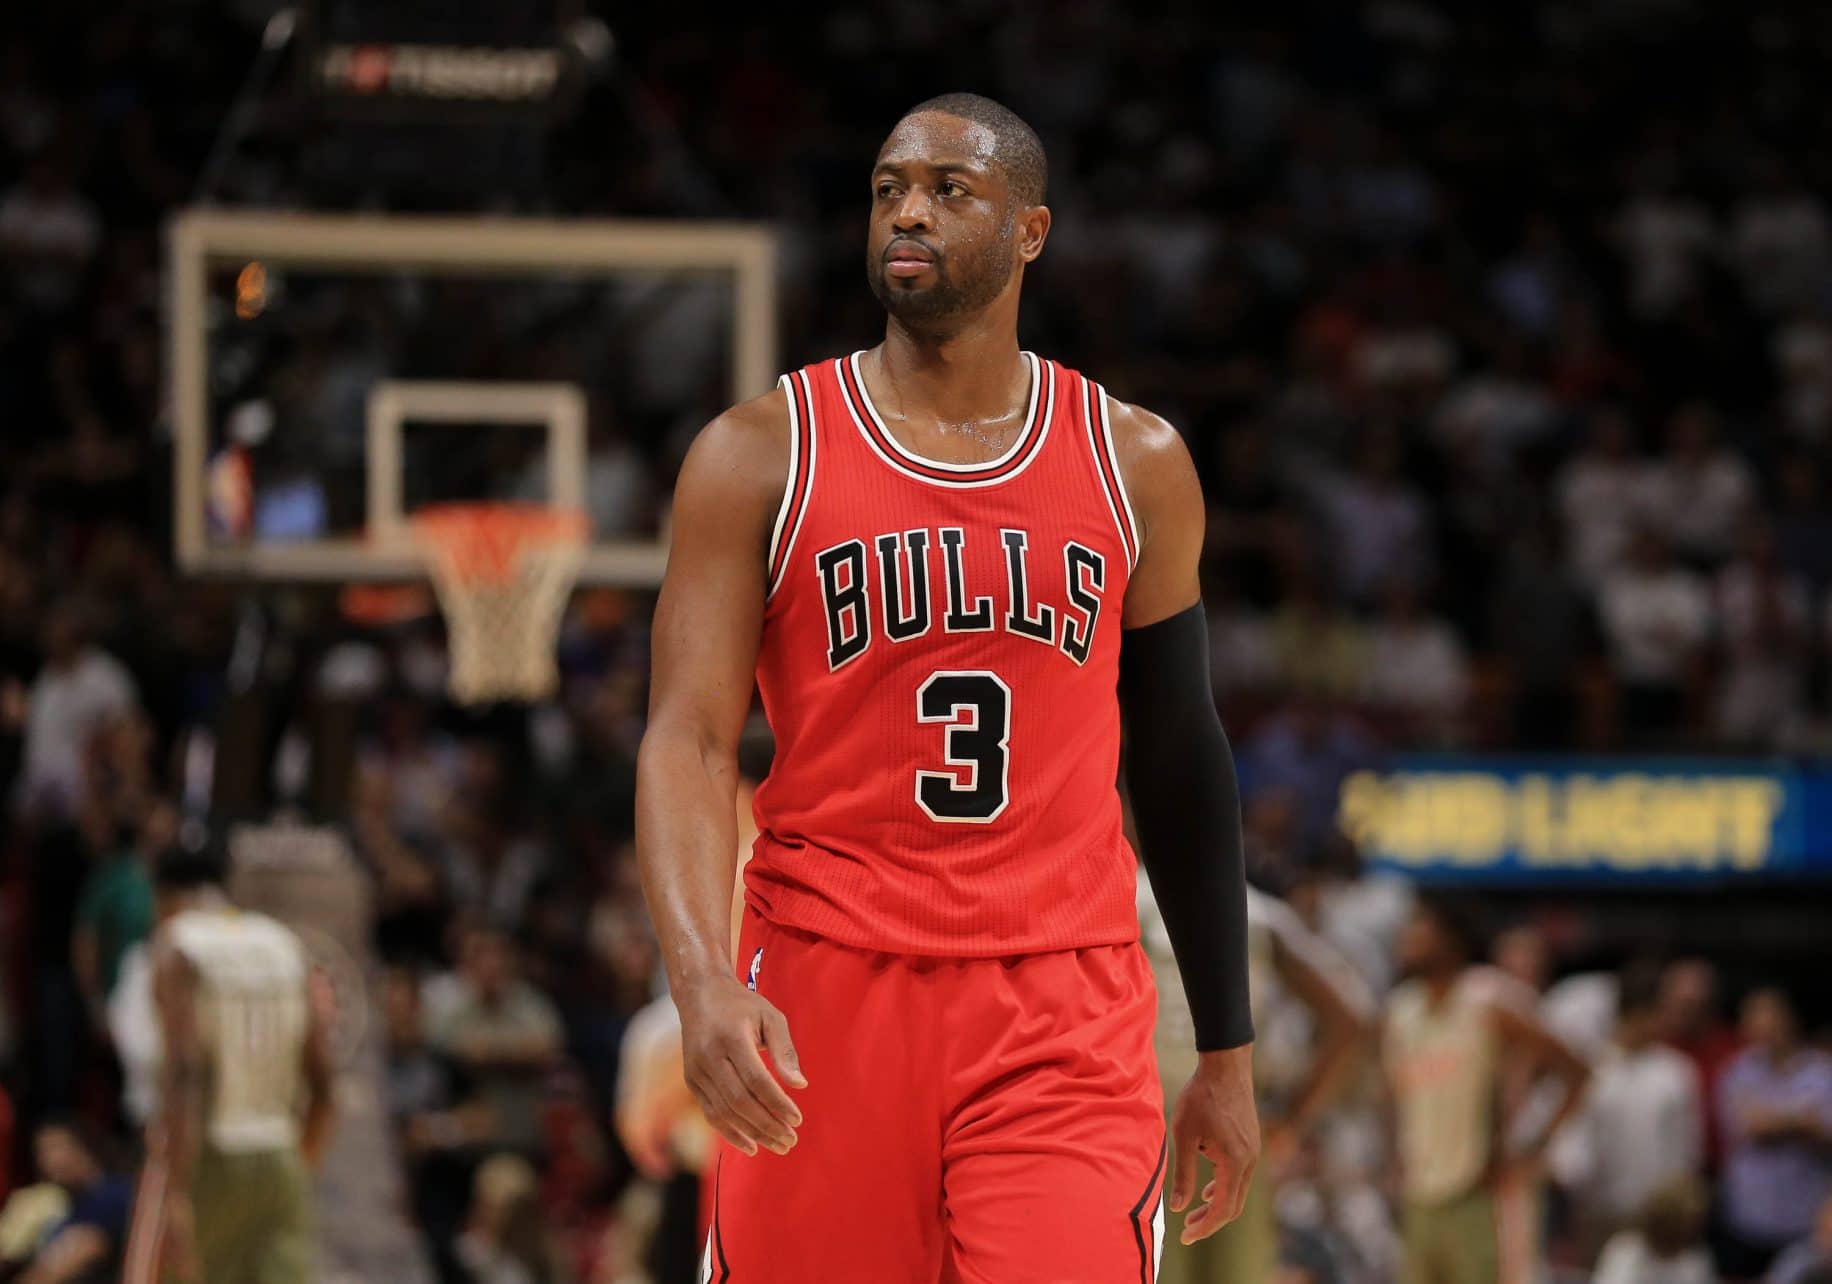 Dwyane Wade Will Sign With The Cleveland Cavaliers (Report) 2